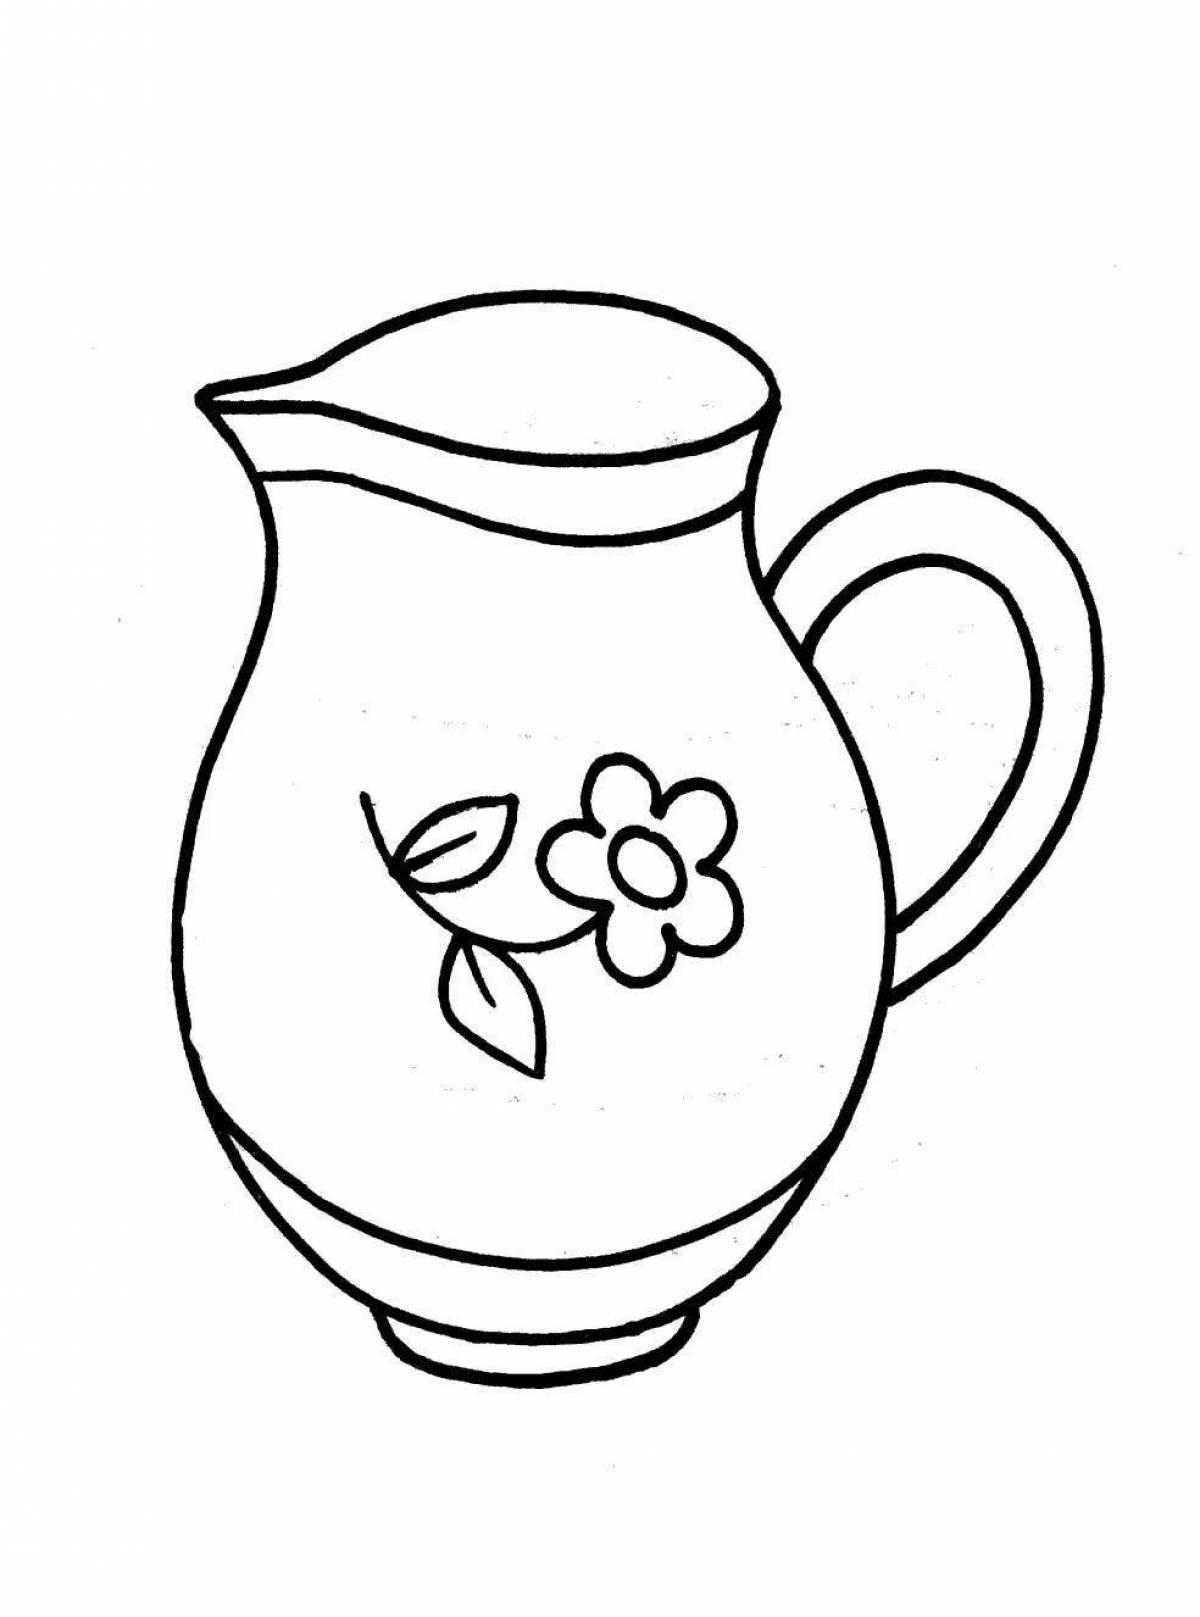 The elder group of the blessed jug